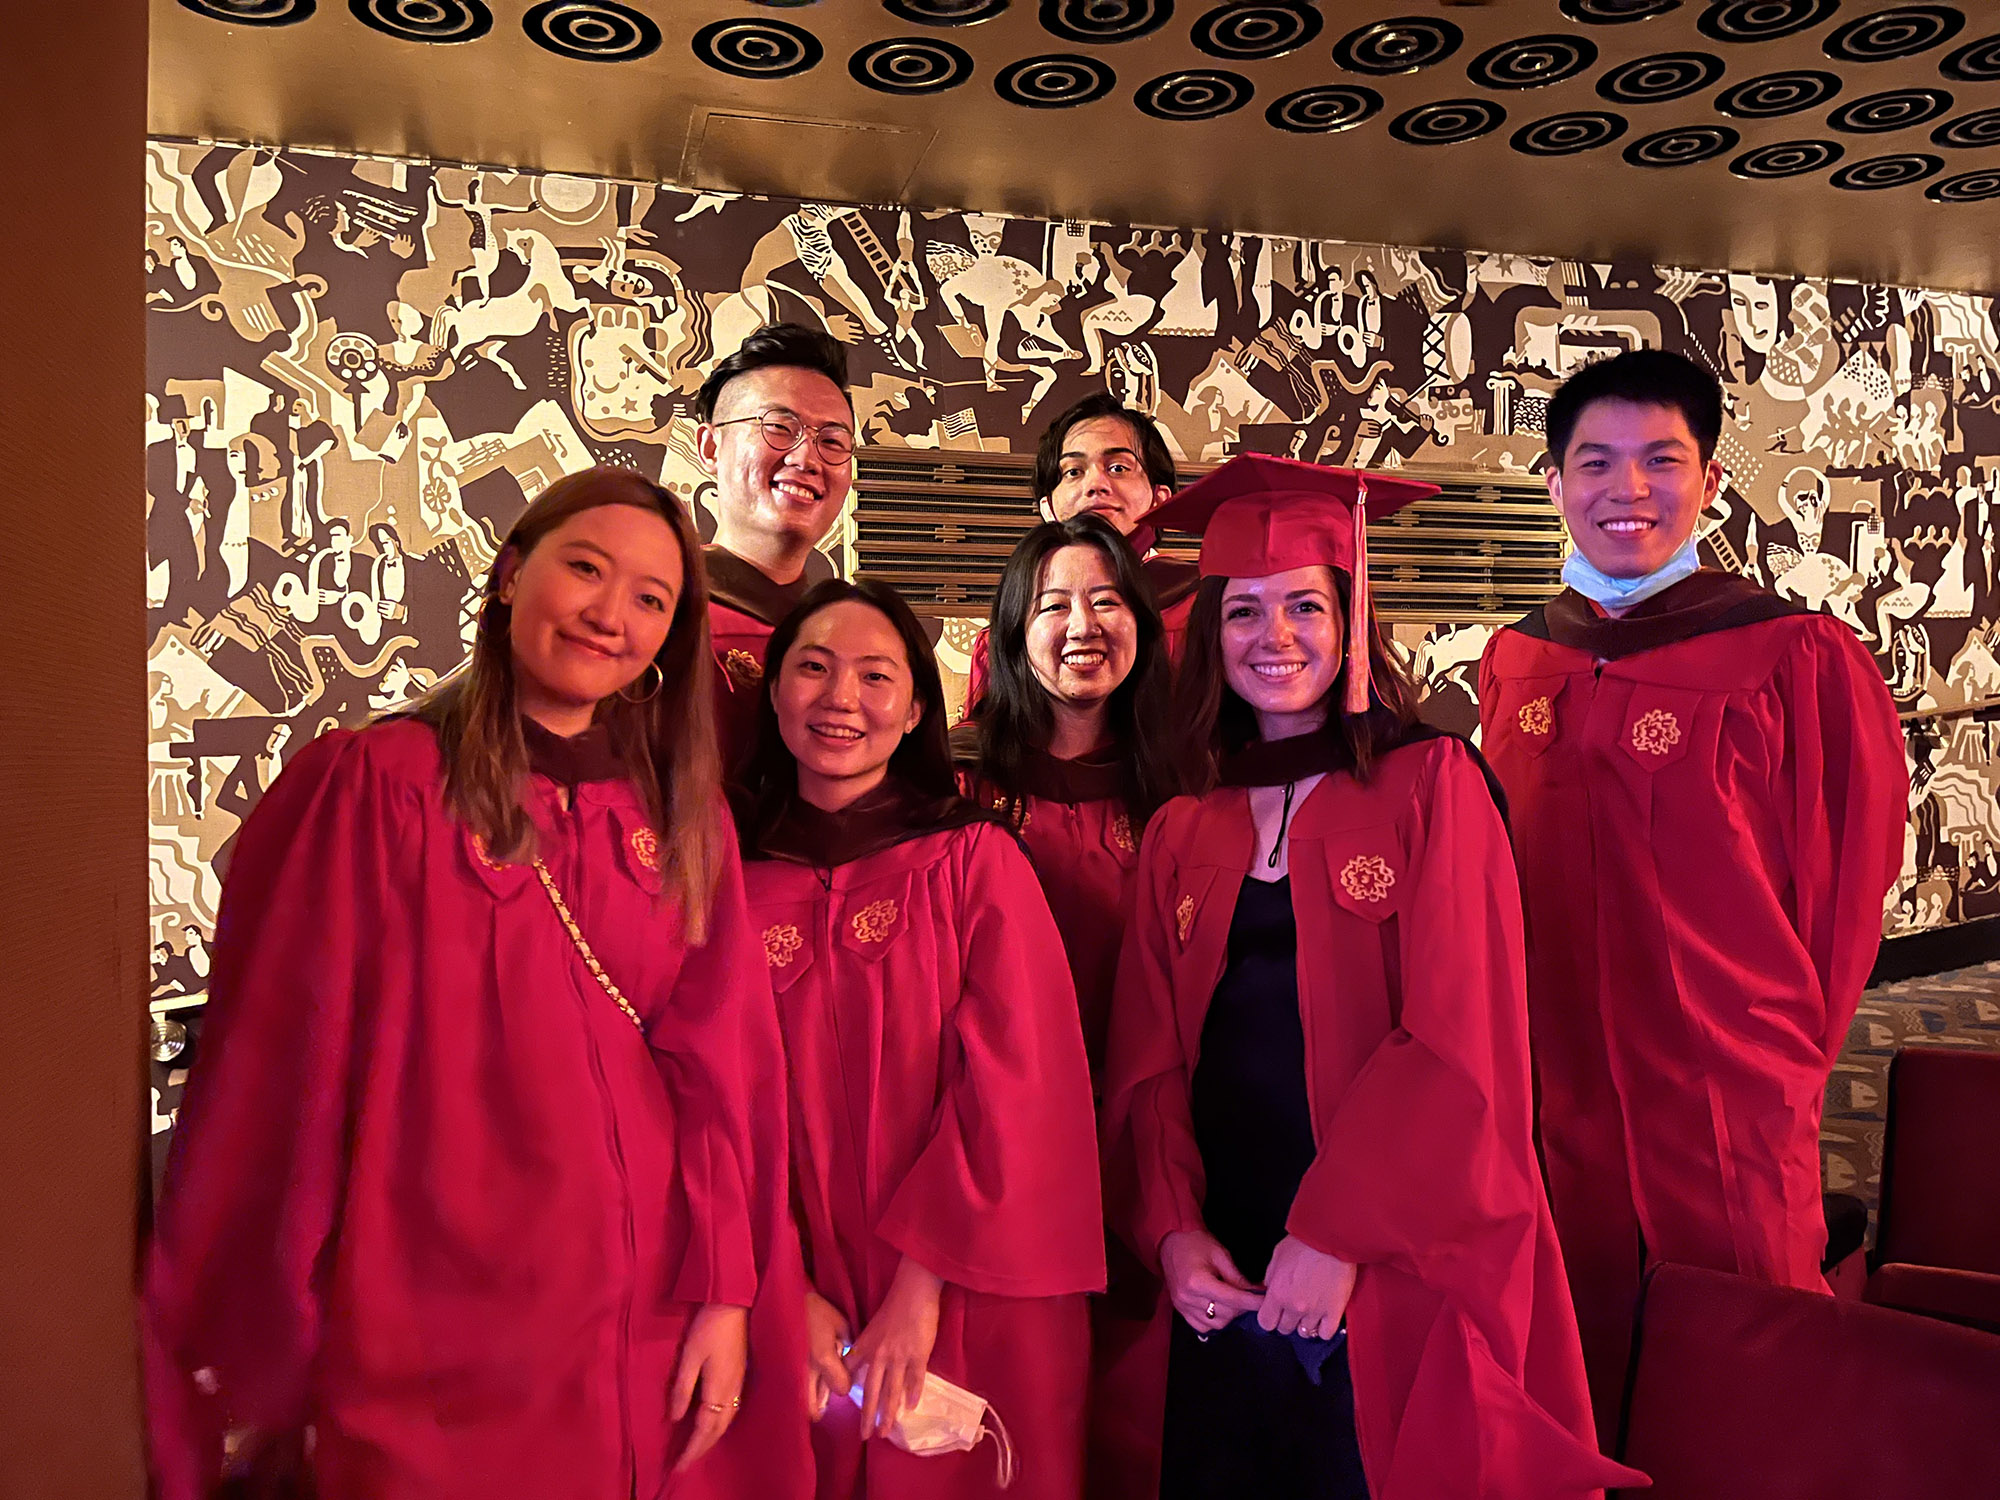 A group of SVA grad students dressed in red robes while standing in a hall with golden plated walls.